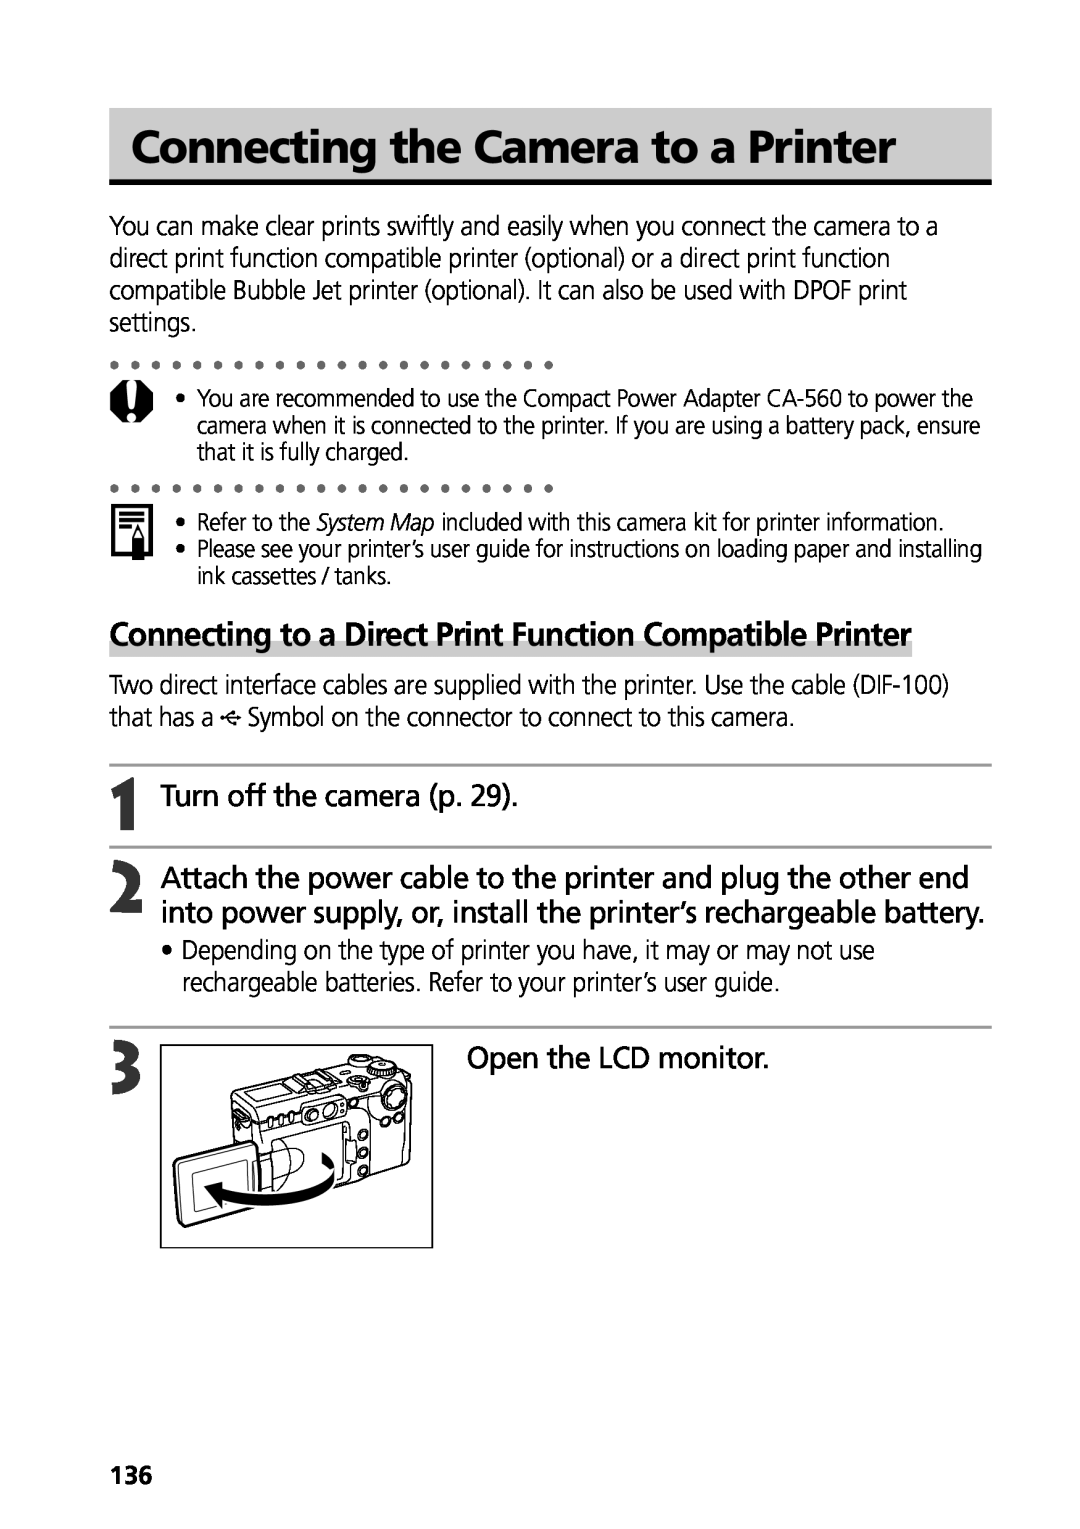 Canon G3 manual Connecting the Camera to a Printer, Connecting to a Direct Print Function Compatible Printer 